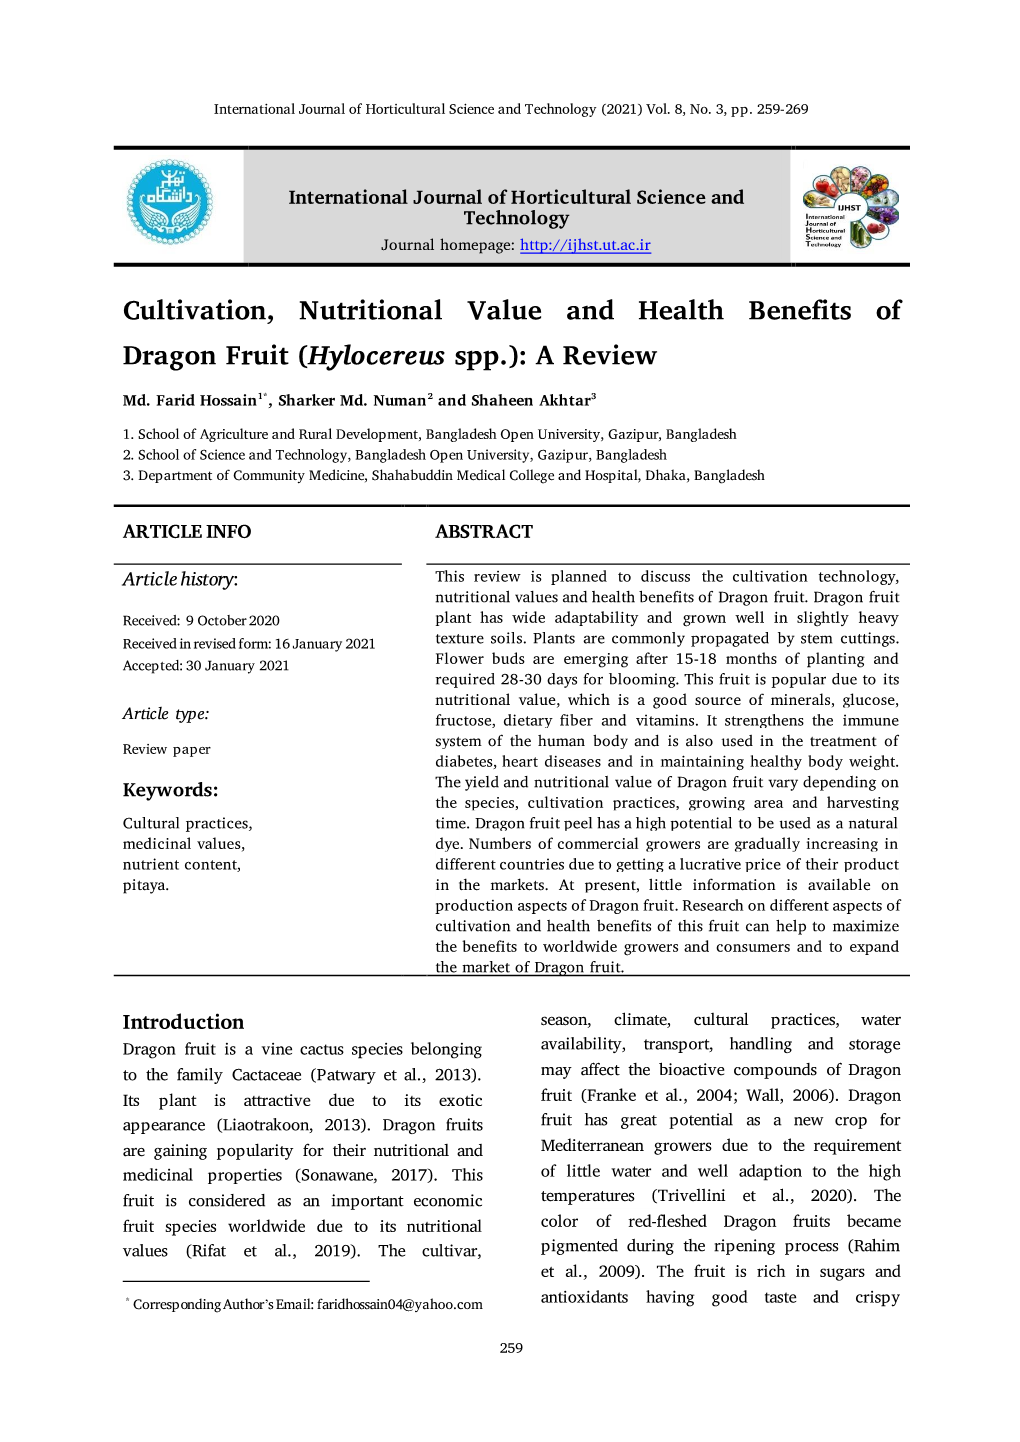 Cultivation, Nutritional Value and Health Benefits of Dragon Fruit (Hylocereus Spp.): a Review